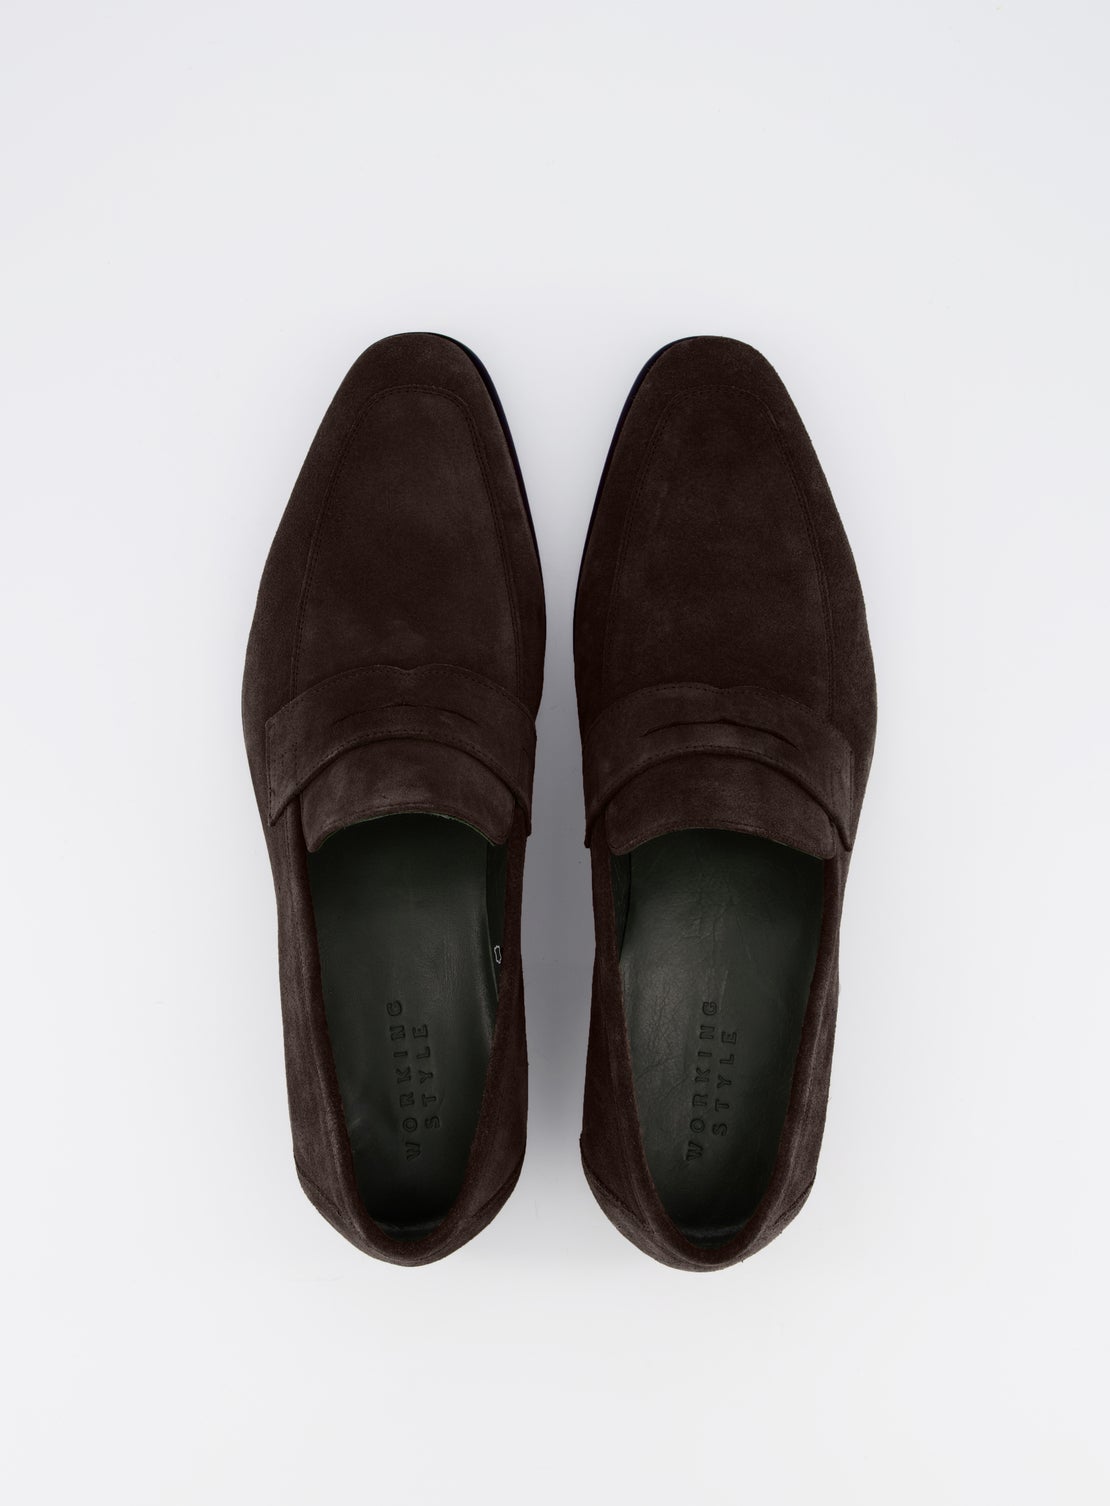 Weller Chocolate Suede Loafer